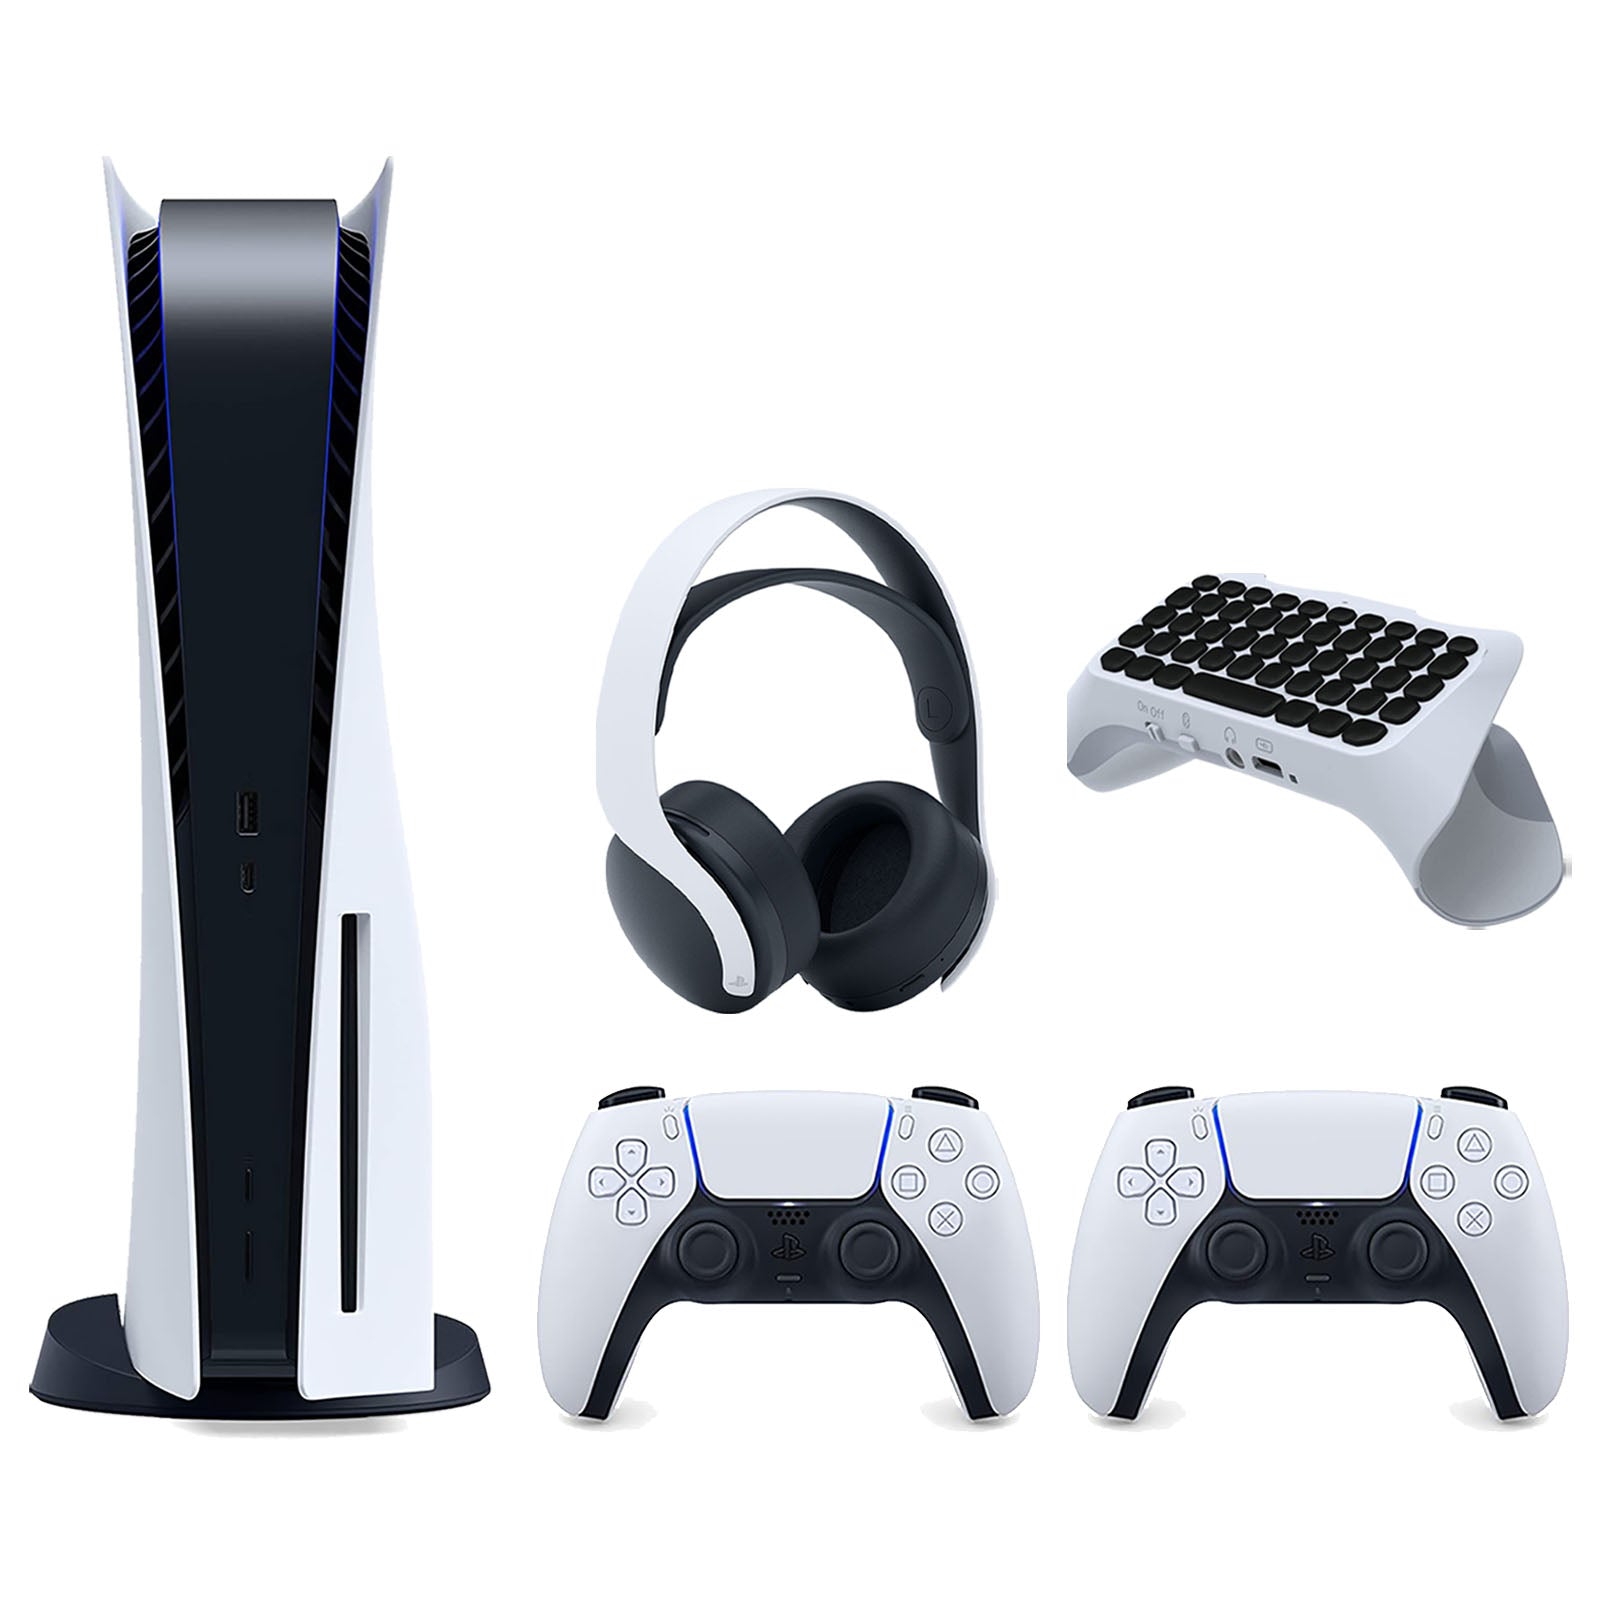 Sony Playstation 5 Disc Version Console with Extra White Controller, White PULSE 3D Headset and Surge QuickType 2.0 Wireless PS5 Controller Keypad Bundle - Pro-Distributing